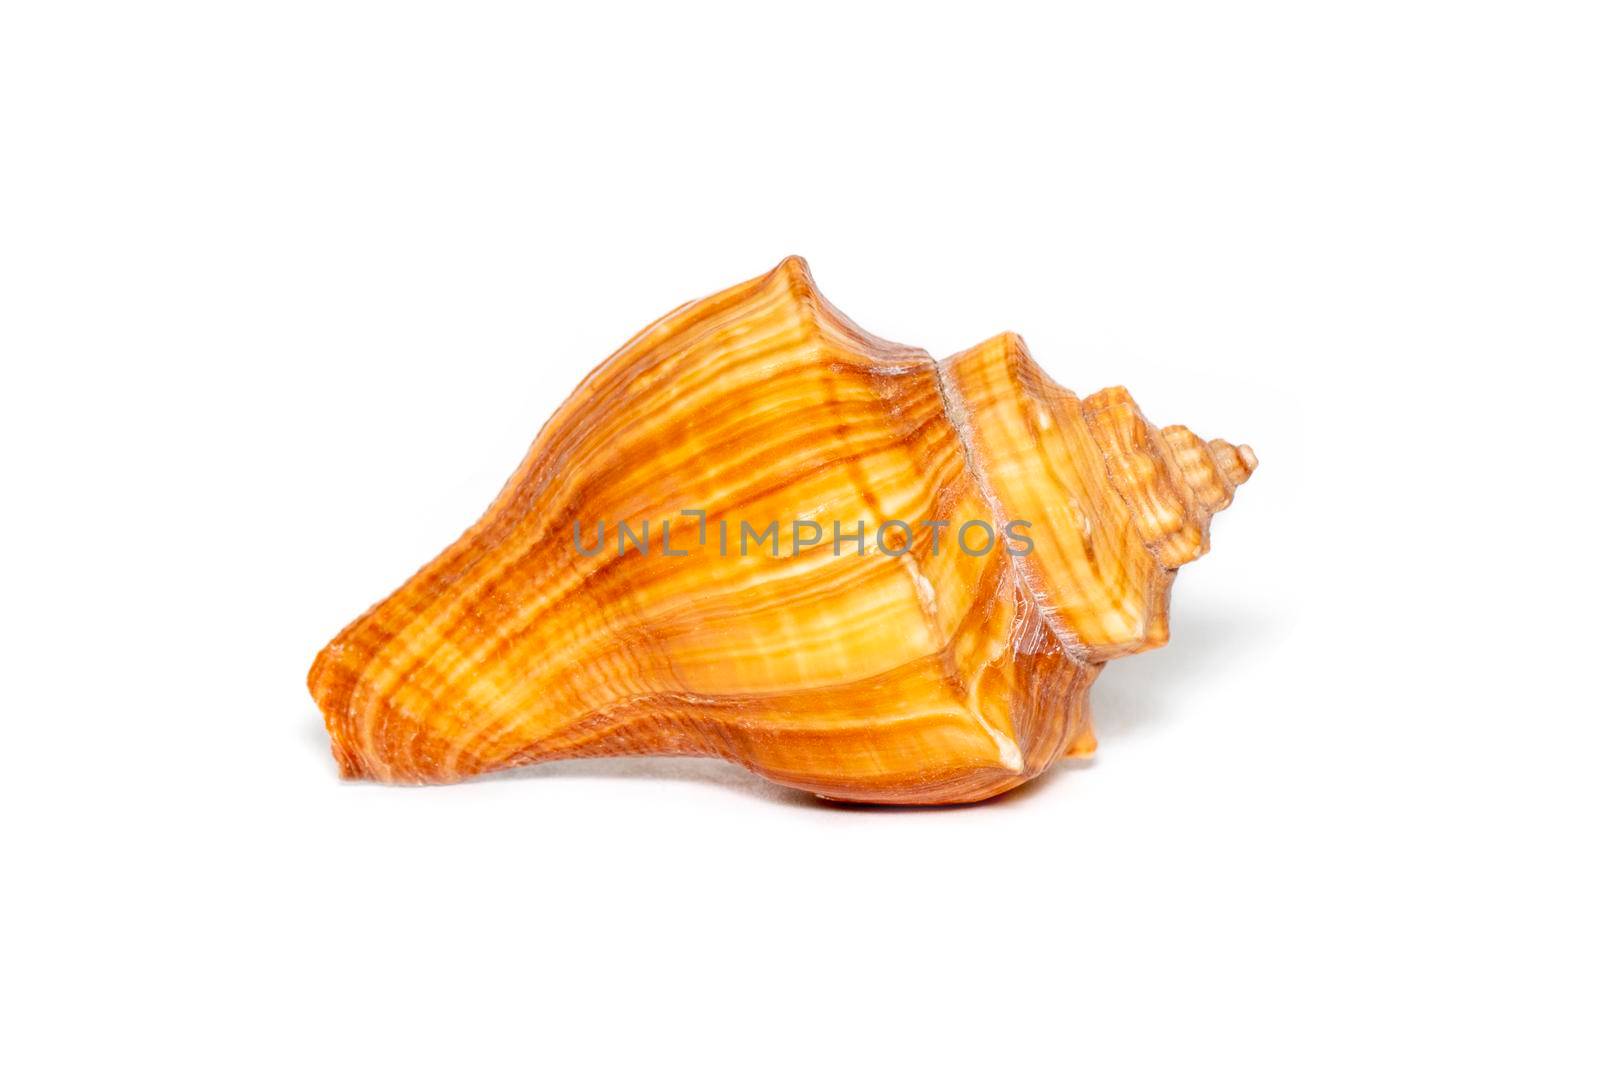 Image of brown conch sea shell on a white background. Undersea Animals. Sea shells.